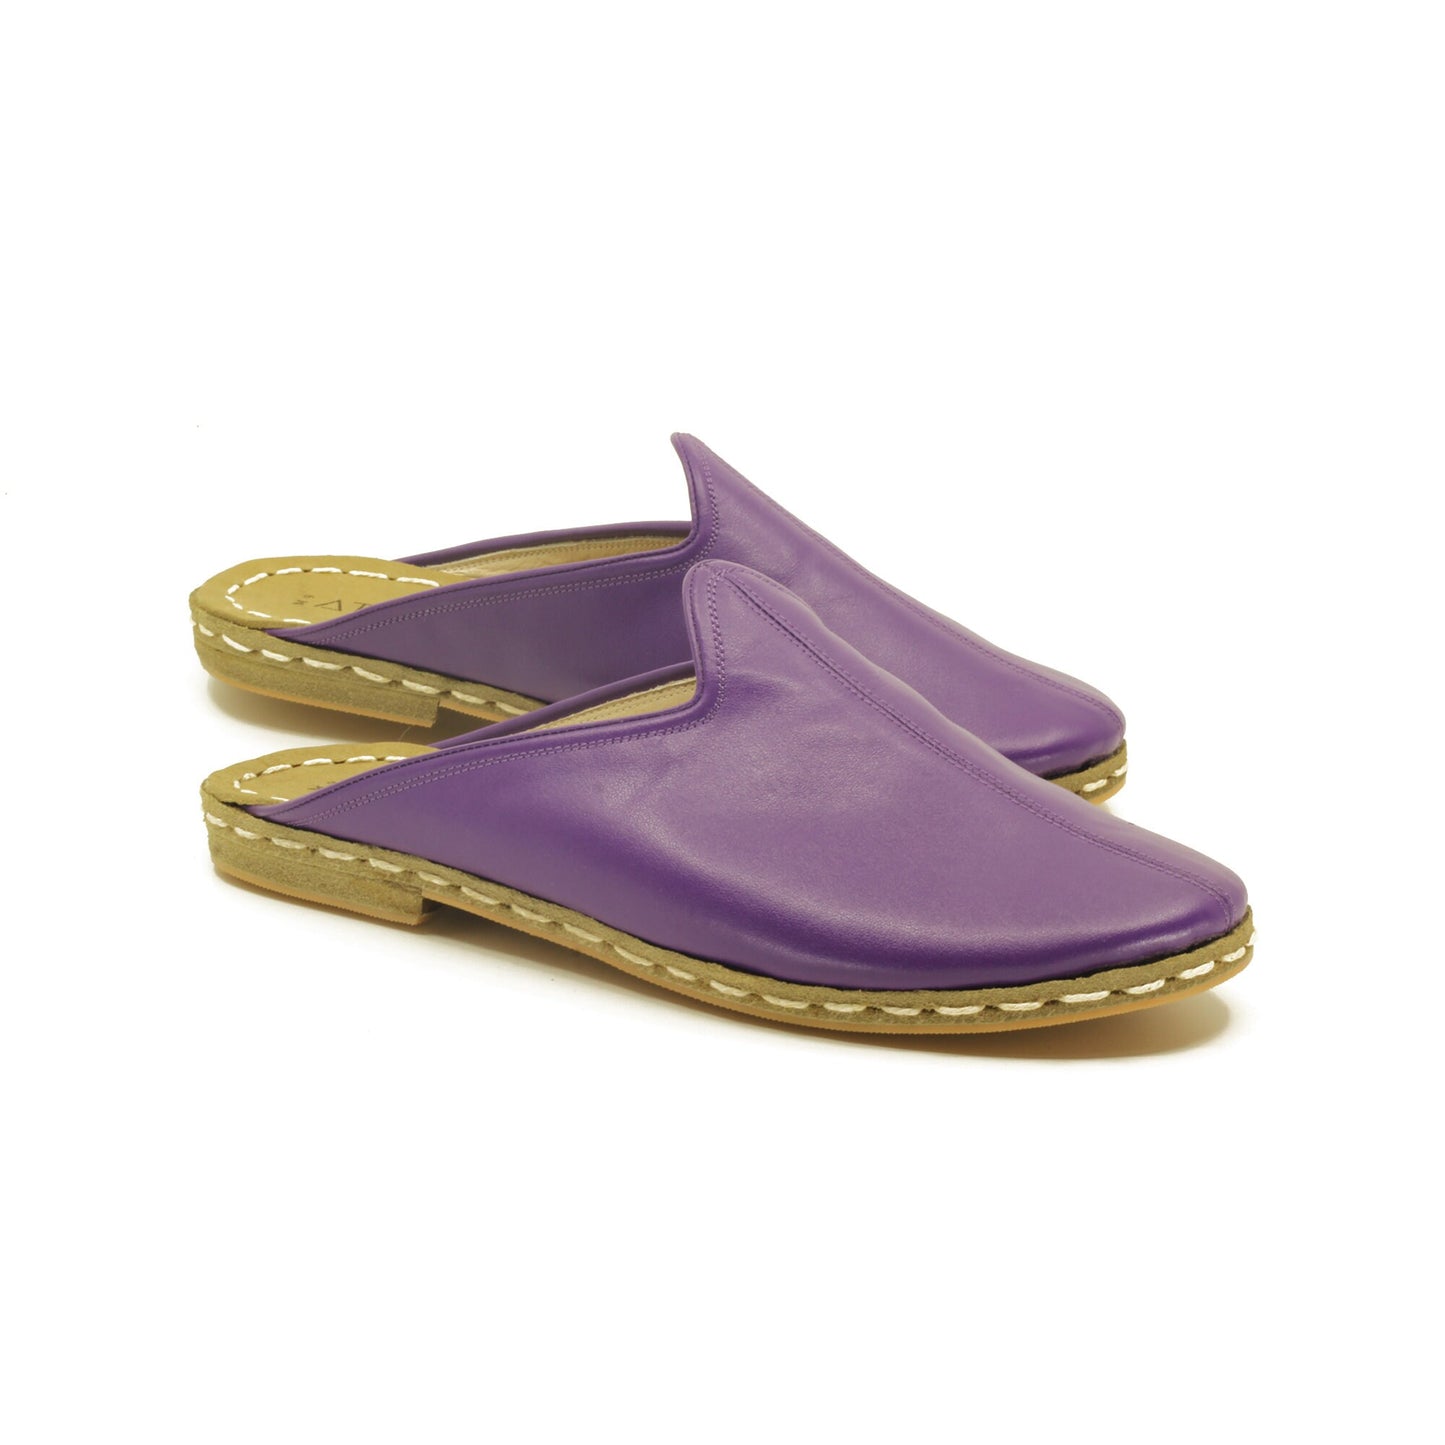 Close Toed Slippers - Purple Leather - Winter Slippers - Rubber Sole - For Women